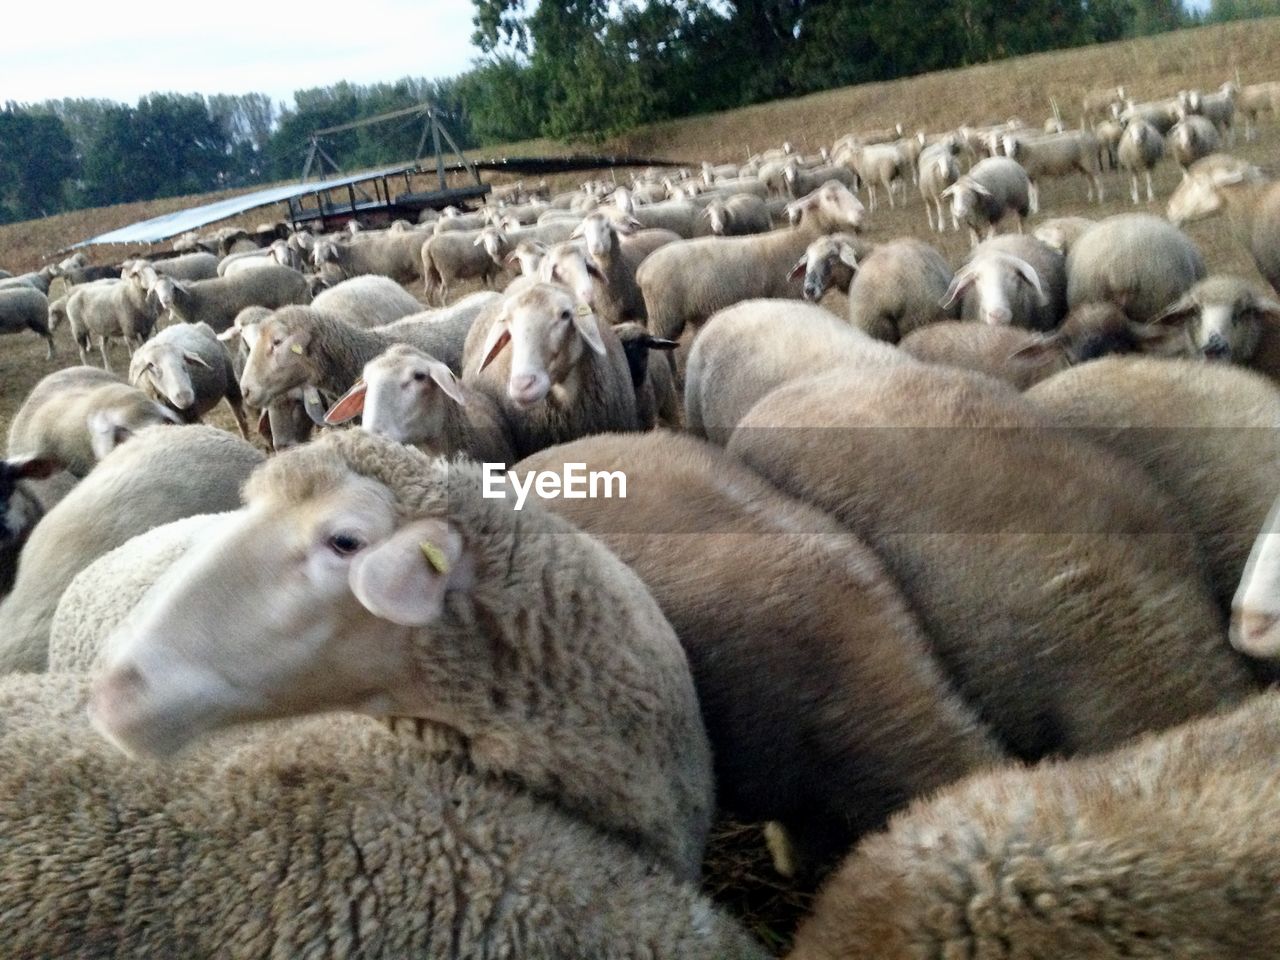 VIEW OF SHEEP IN A FIELD